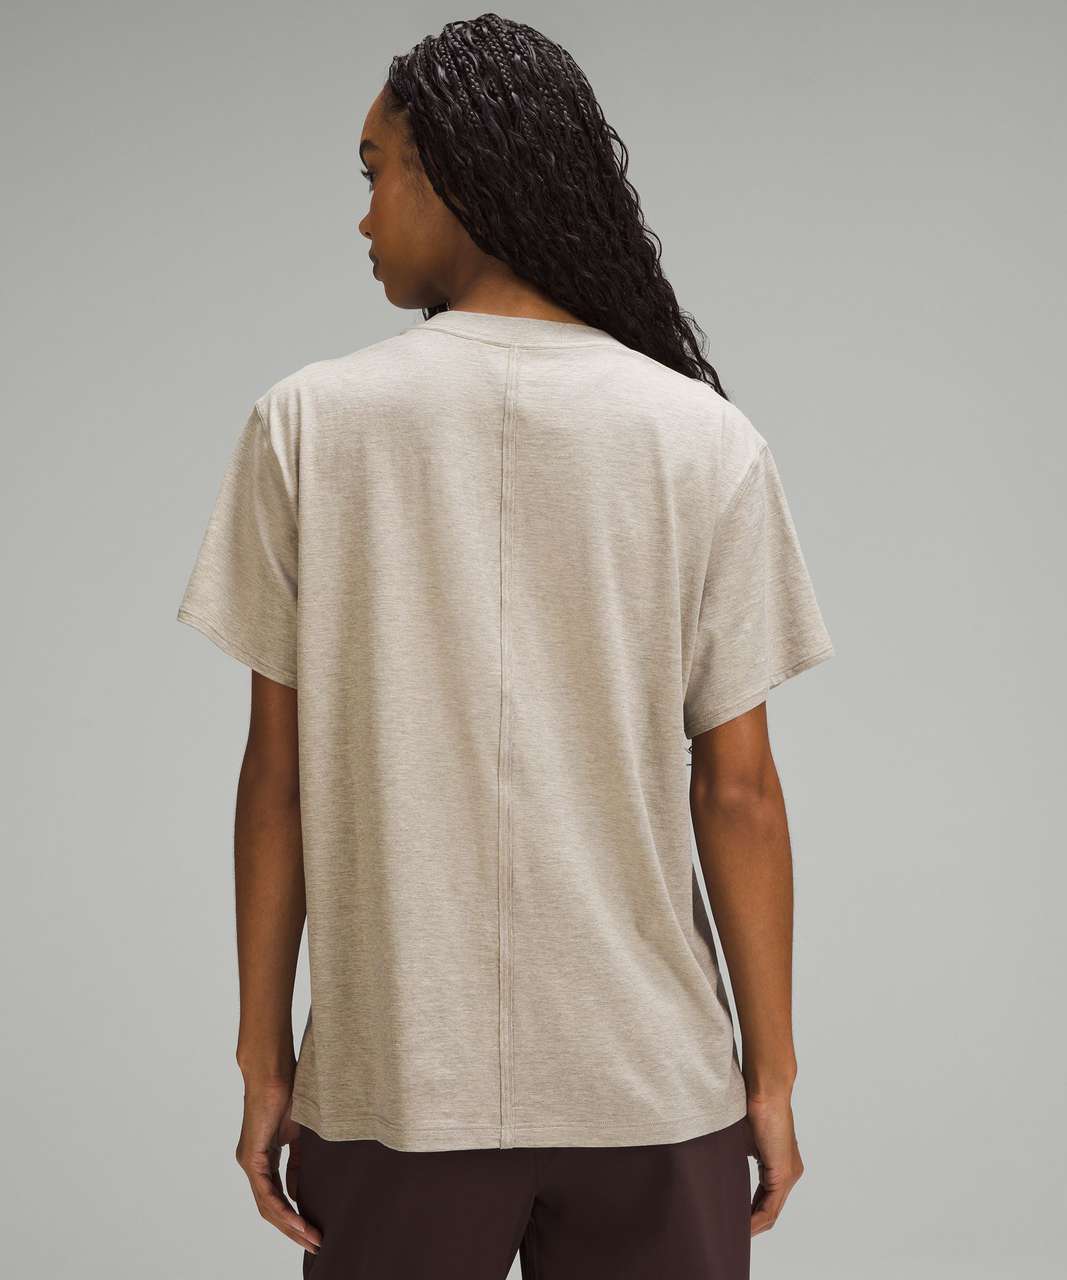 Lululemon All Yours Cotton T-Shirt - Heathered Riverstone